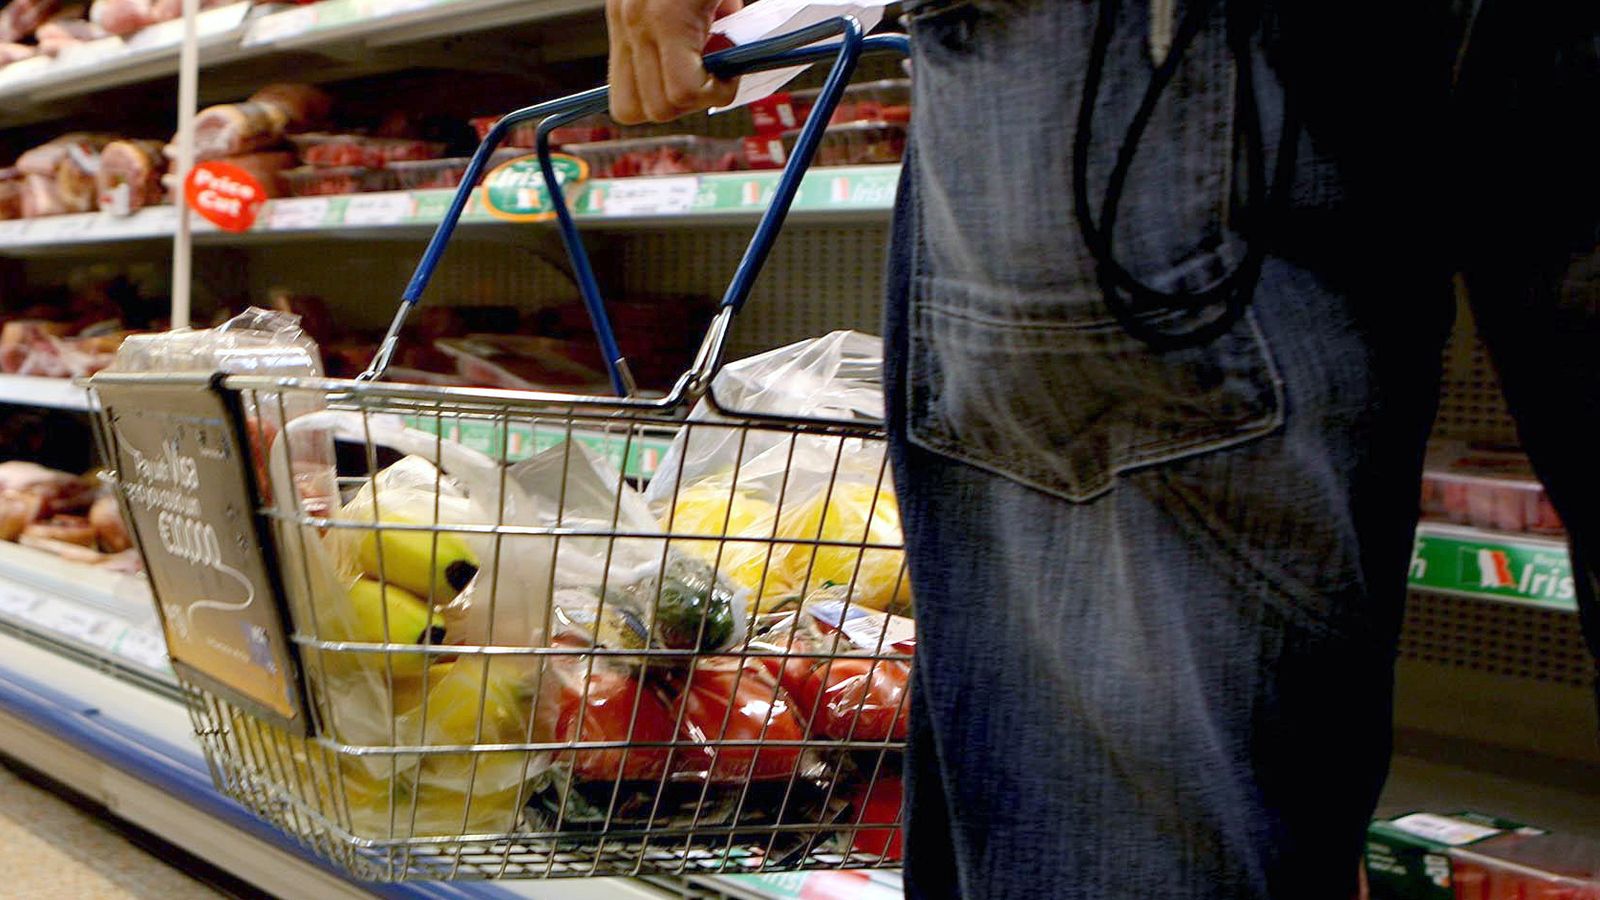 Food inflation hits another record high as pressure mounts on home finances